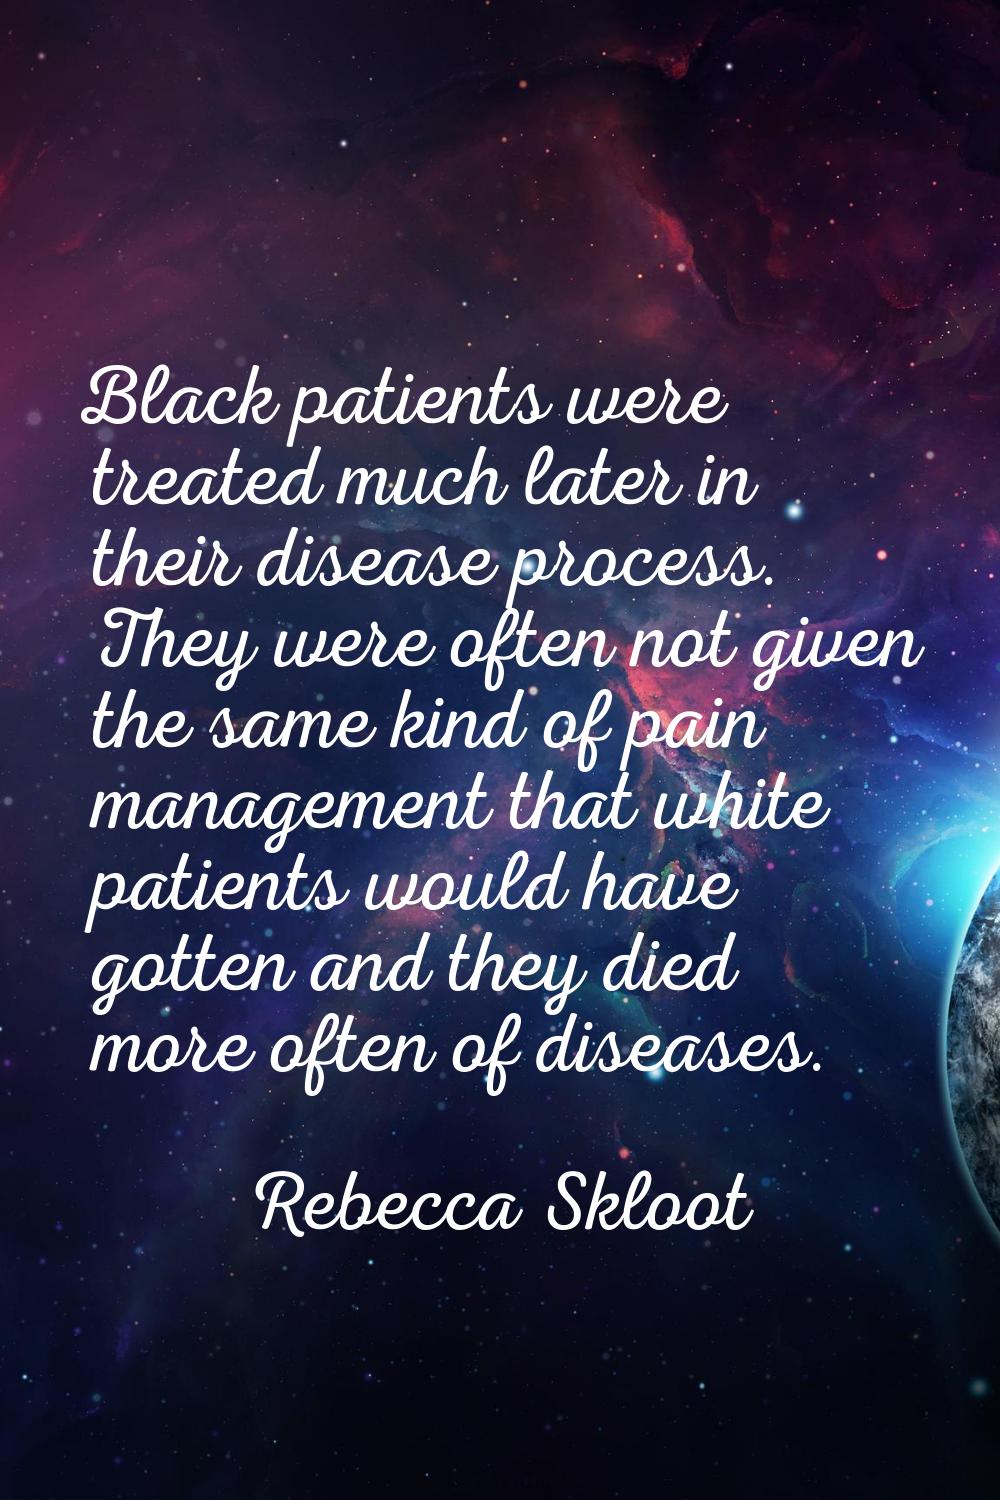 Black patients were treated much later in their disease process. They were often not given the same